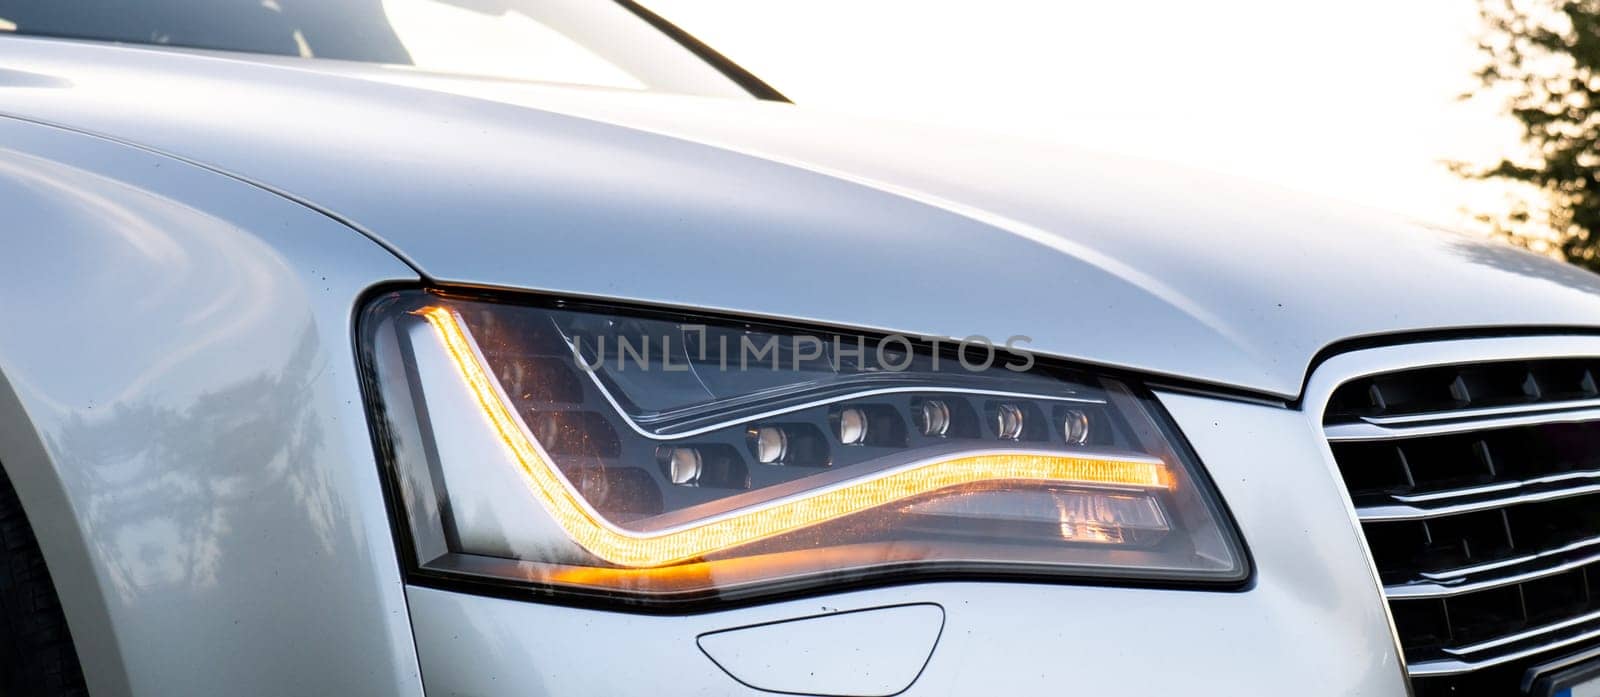 Headlight turned on in Clean car after Washing luxury silver car. Sedan car exterior of modern luxury car during sunset on highway road. Details of front headlamp. Prestige sport by anna_stasiia